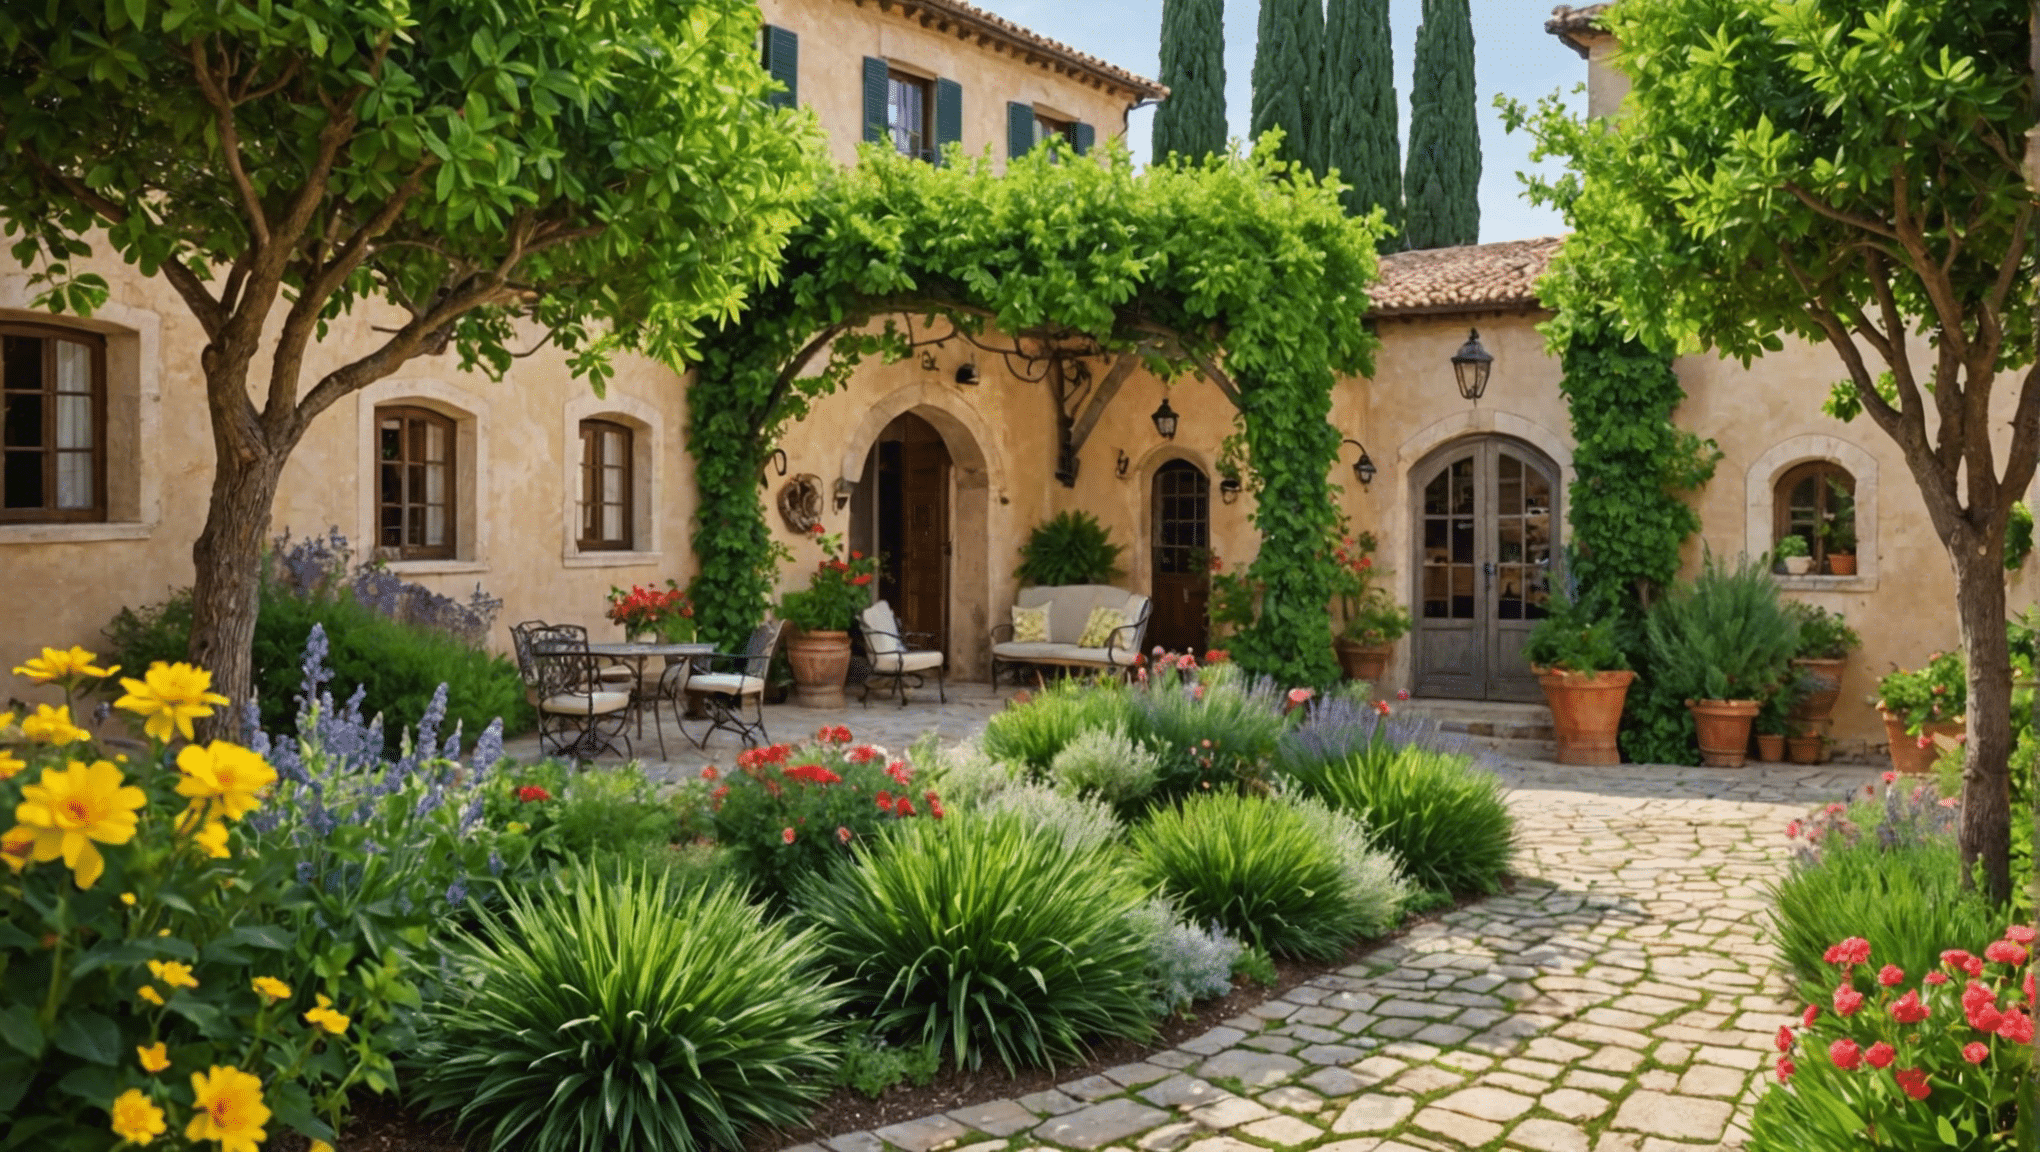 discover how mediterranean gardening ideas can elevate your outdoor space with stunning designs, vibrant colors, and lush greenery.